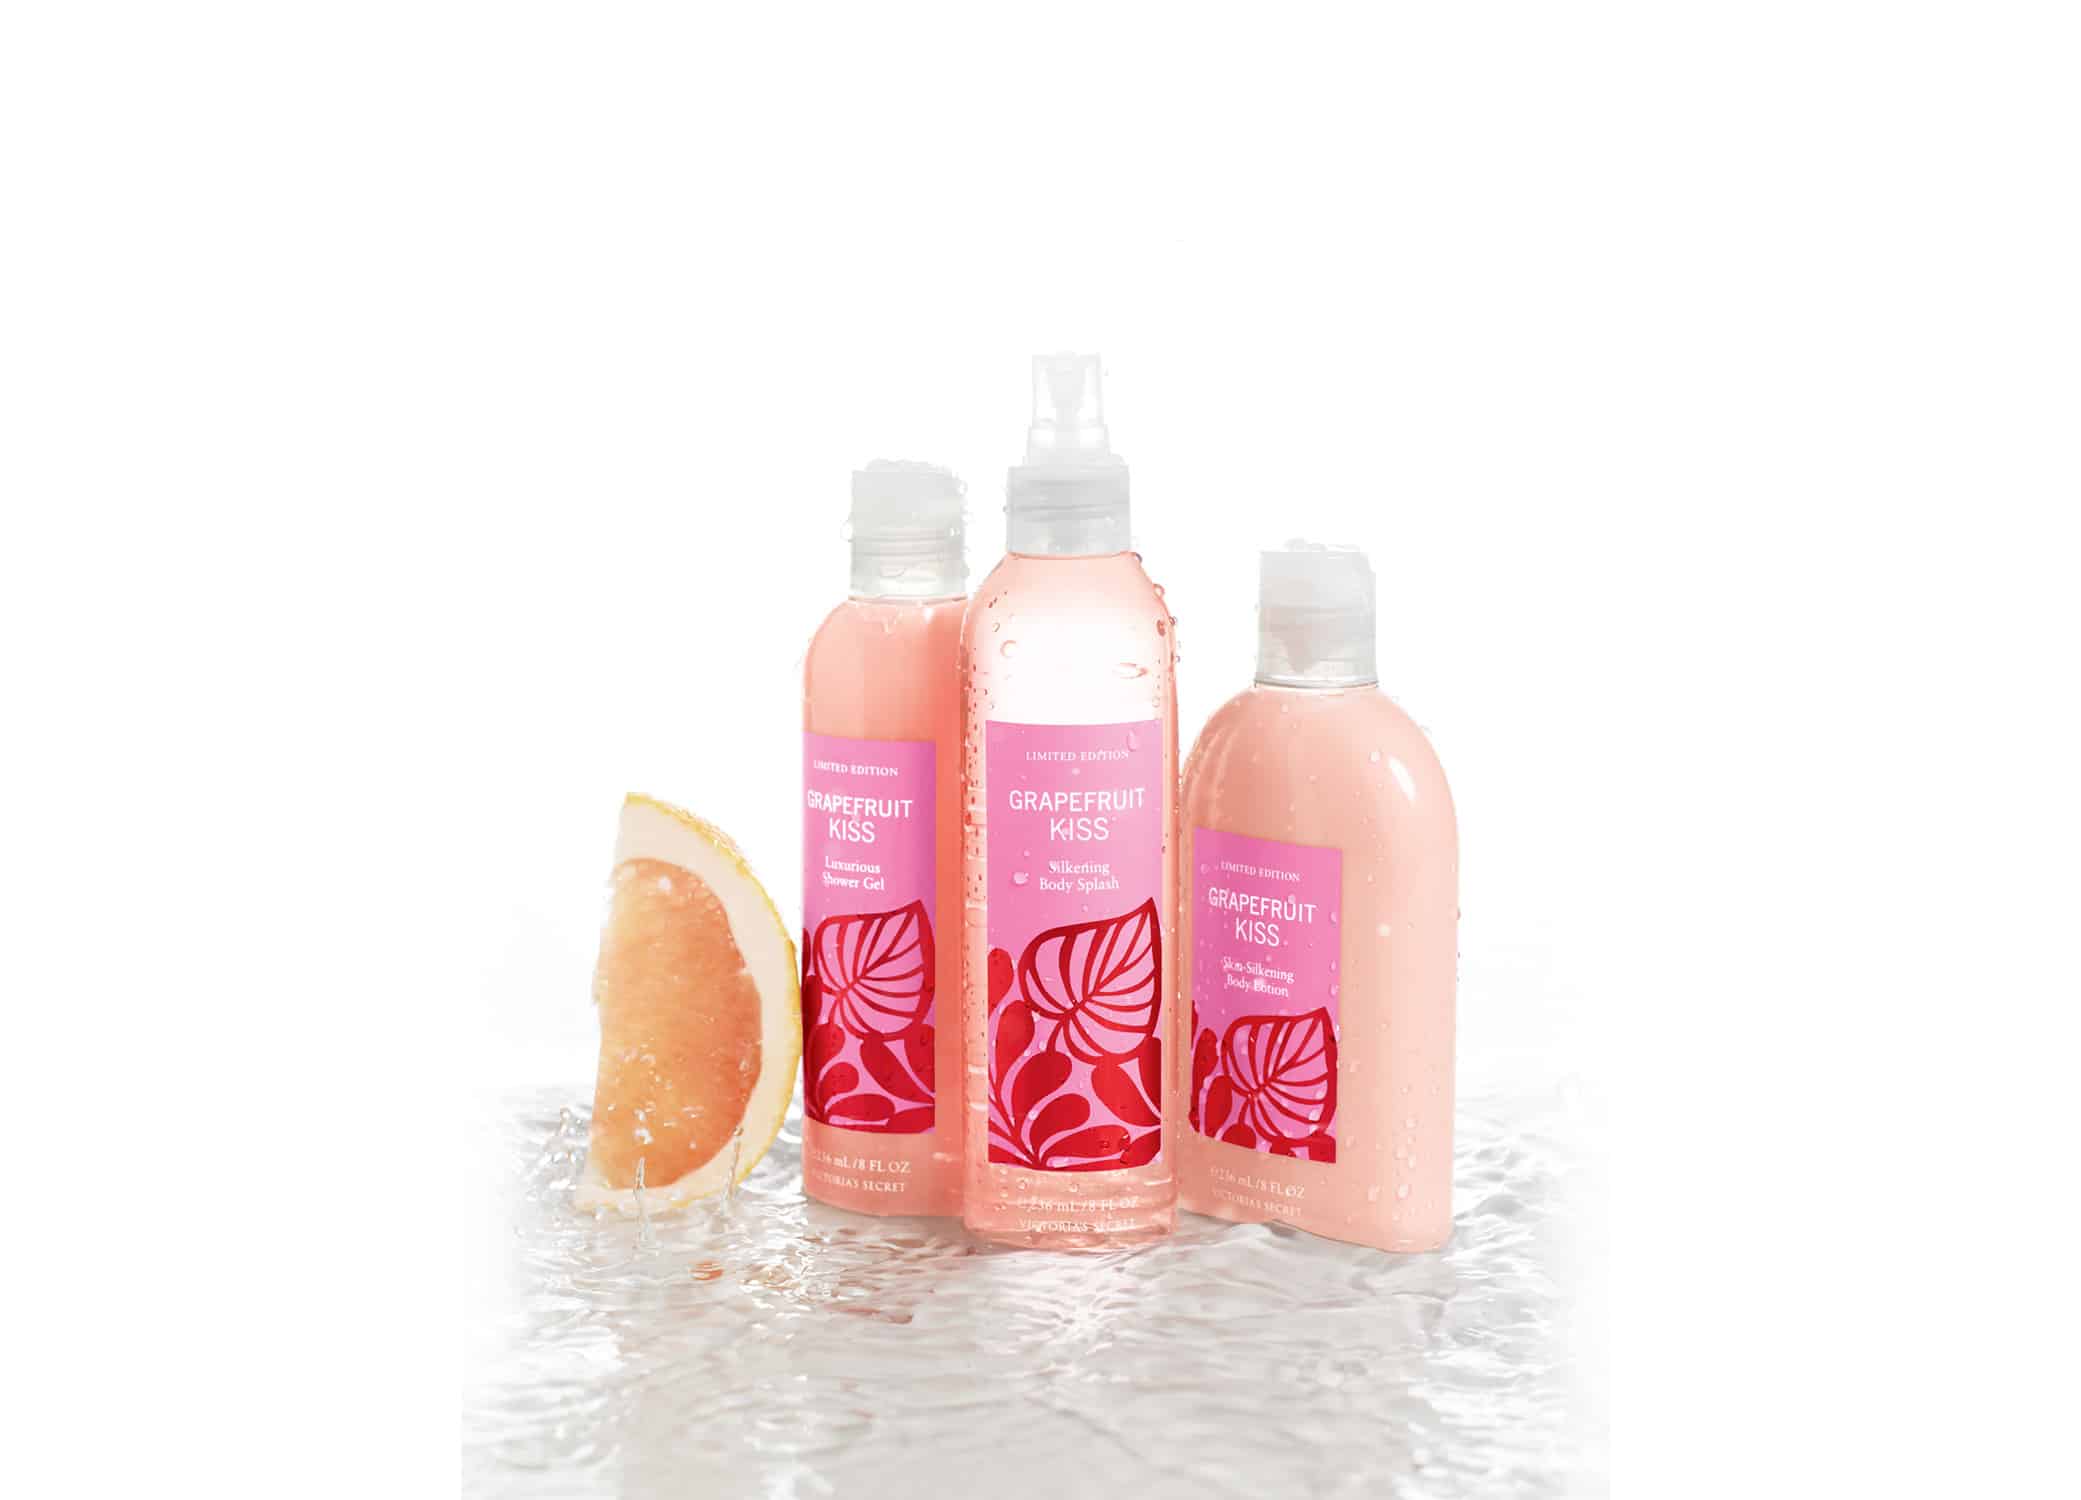 Packaging for bath and body products Victoria's Secret Summer Promo Grapefruit Kiss line in pink and red color palette and grapefruit slice.